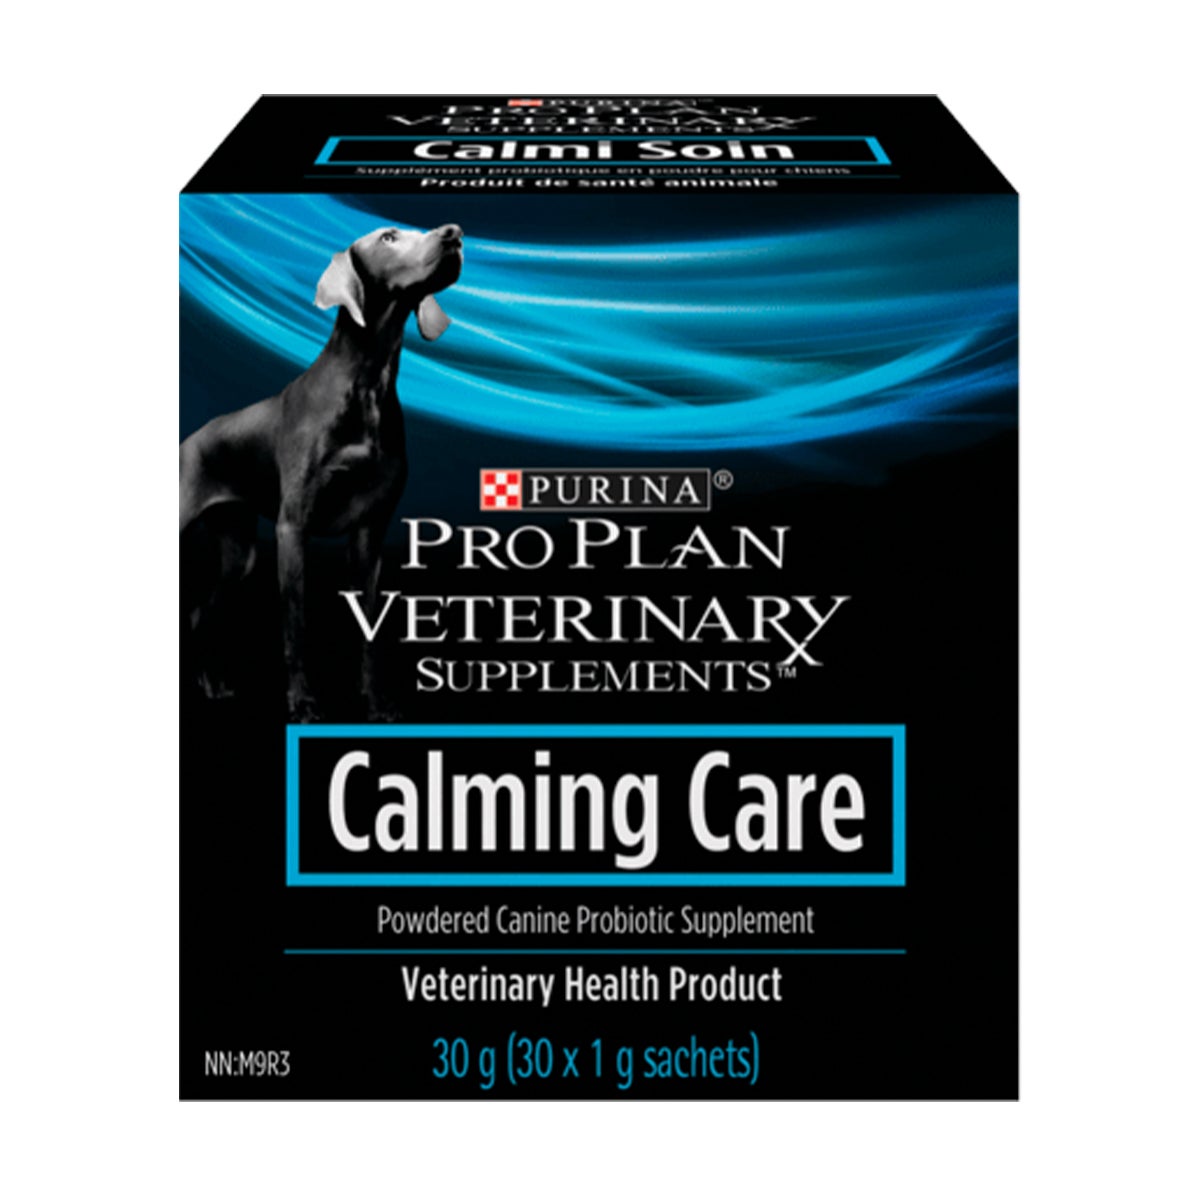 purina-pro-plan-calming-care-producto.jpg